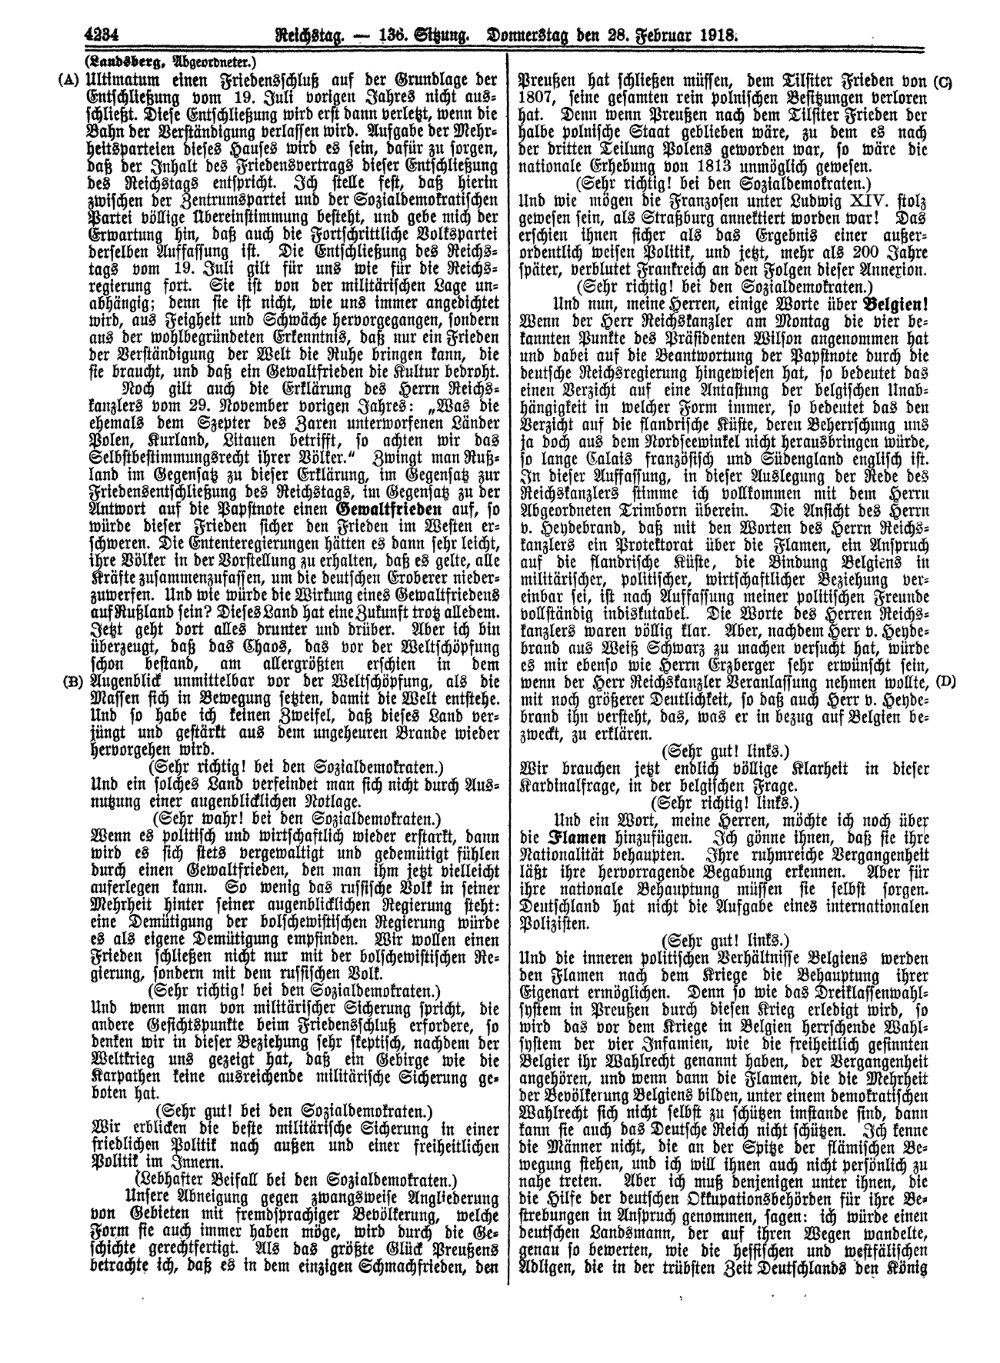 Scan of page 4234